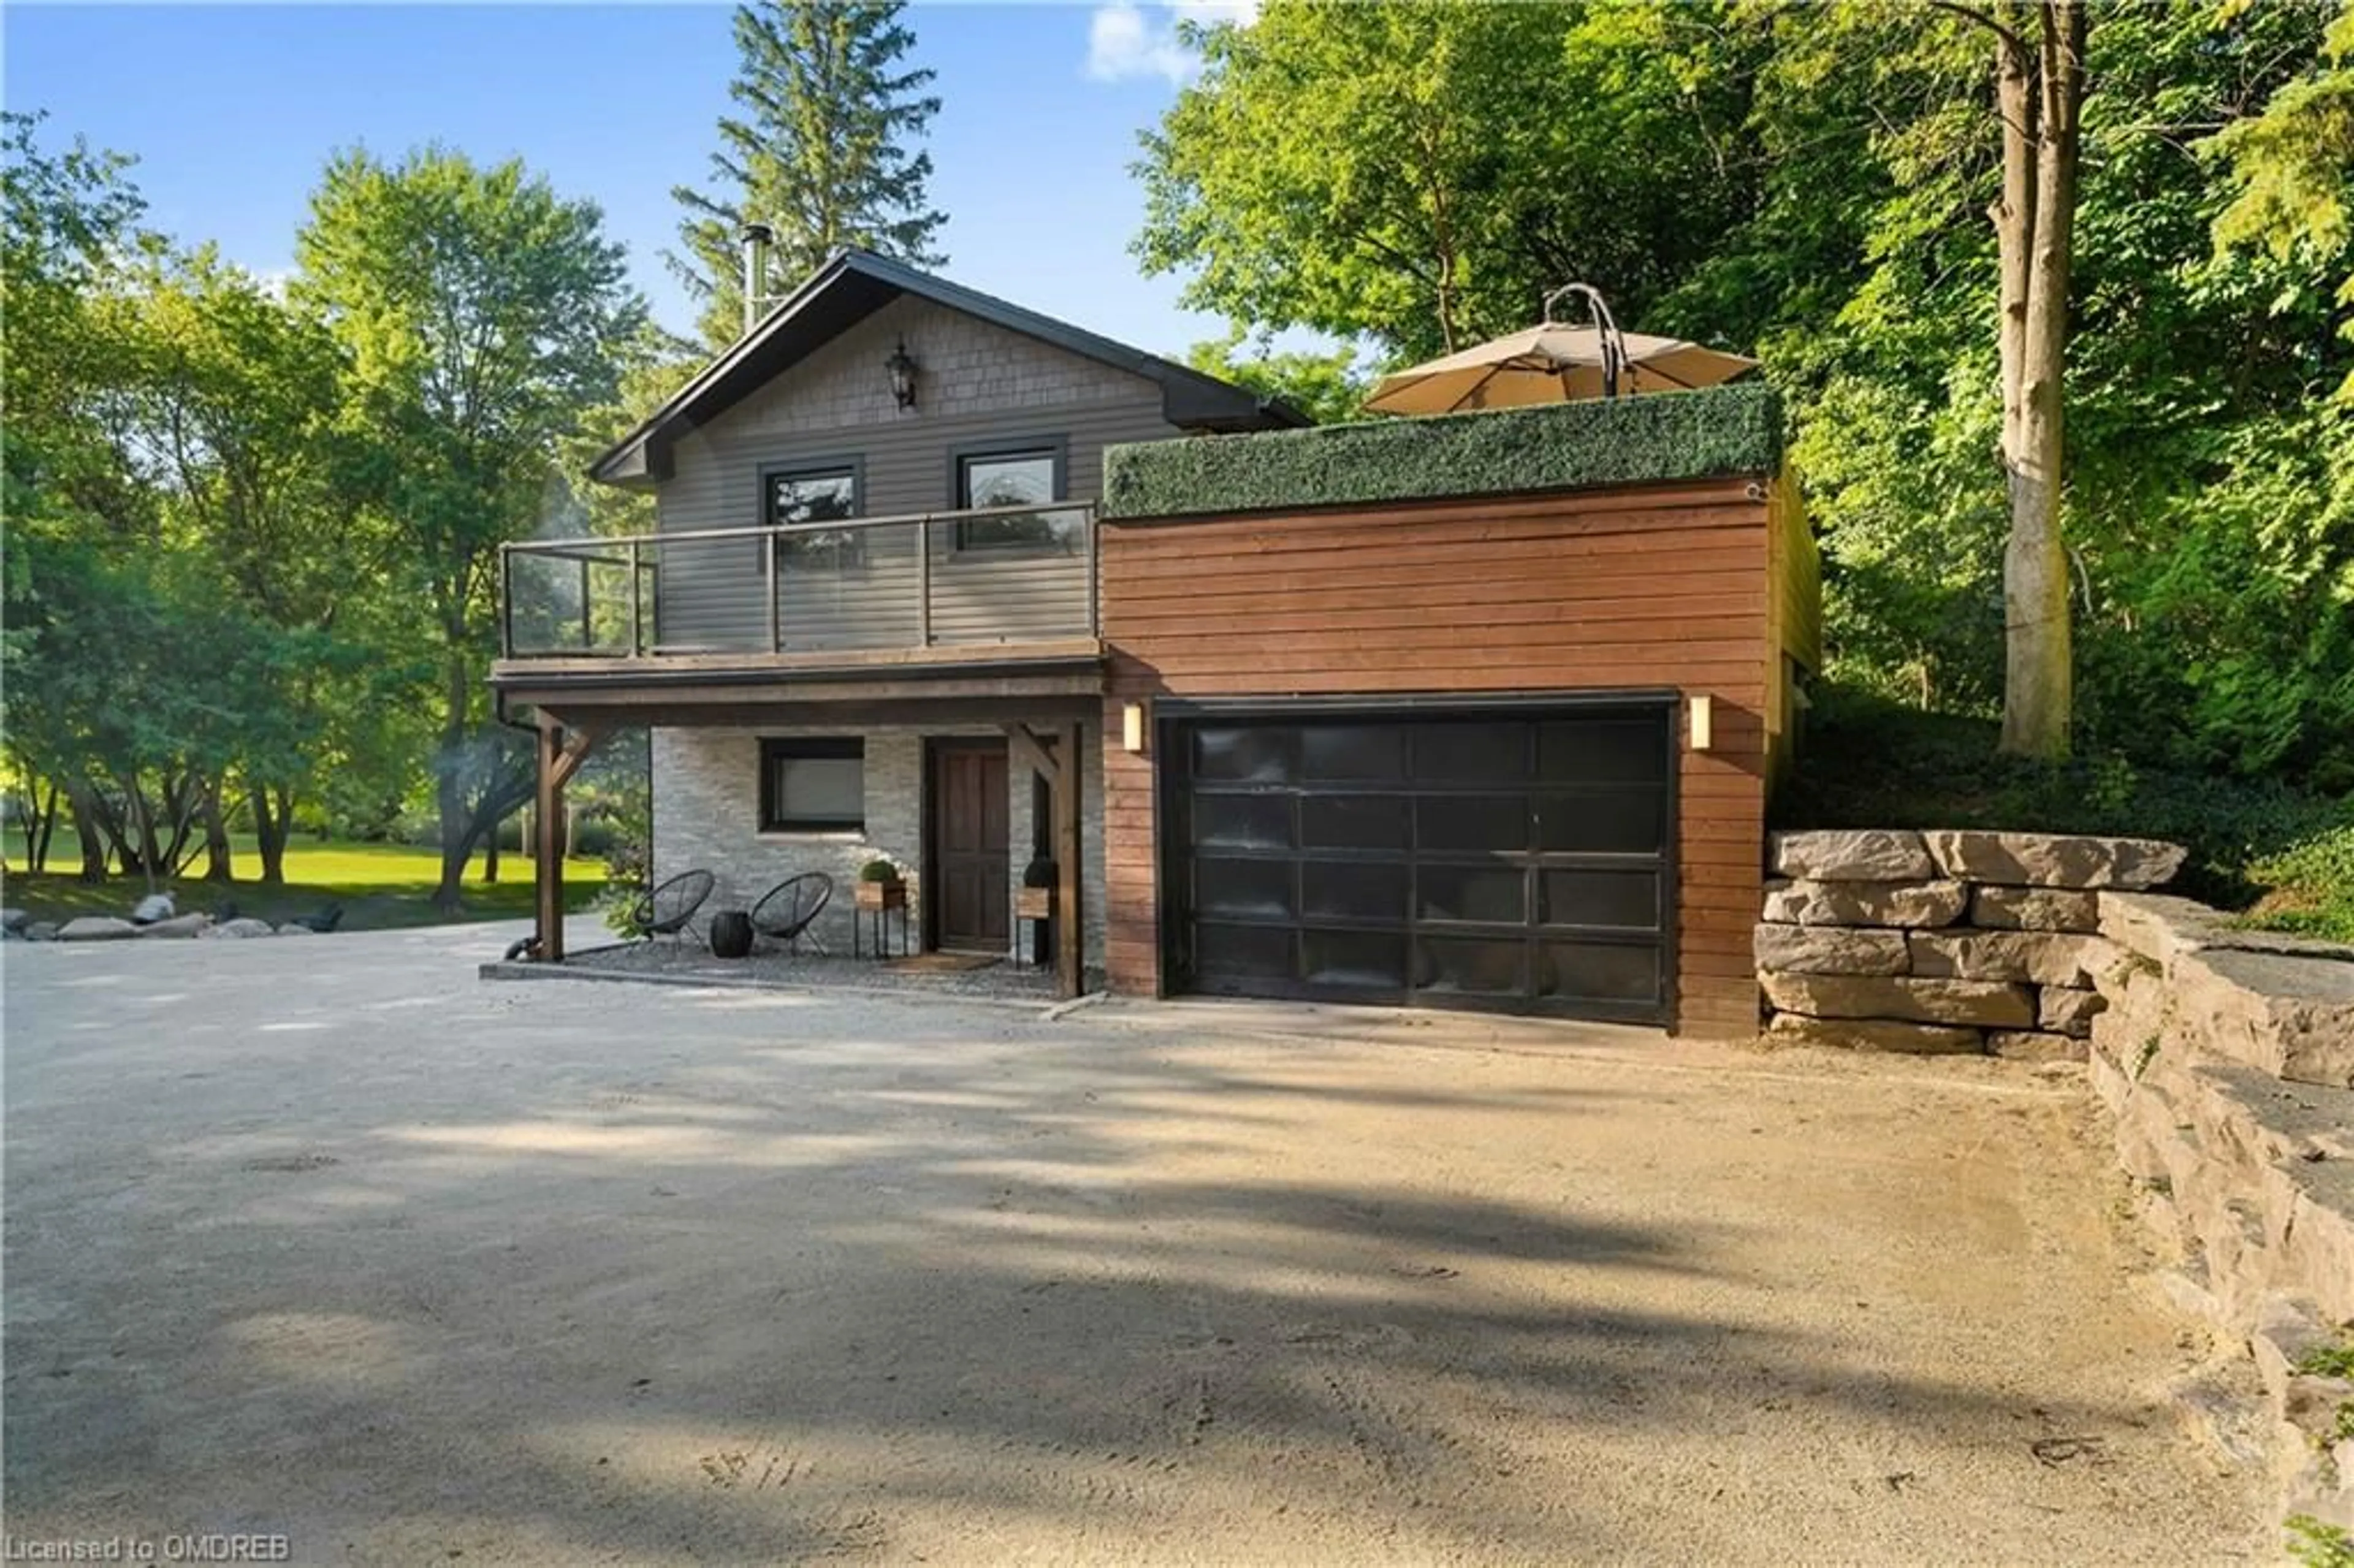 Frontside or backside of a home for 645 Mountain Ridge, Collingwood Ontario L9Y 5G2